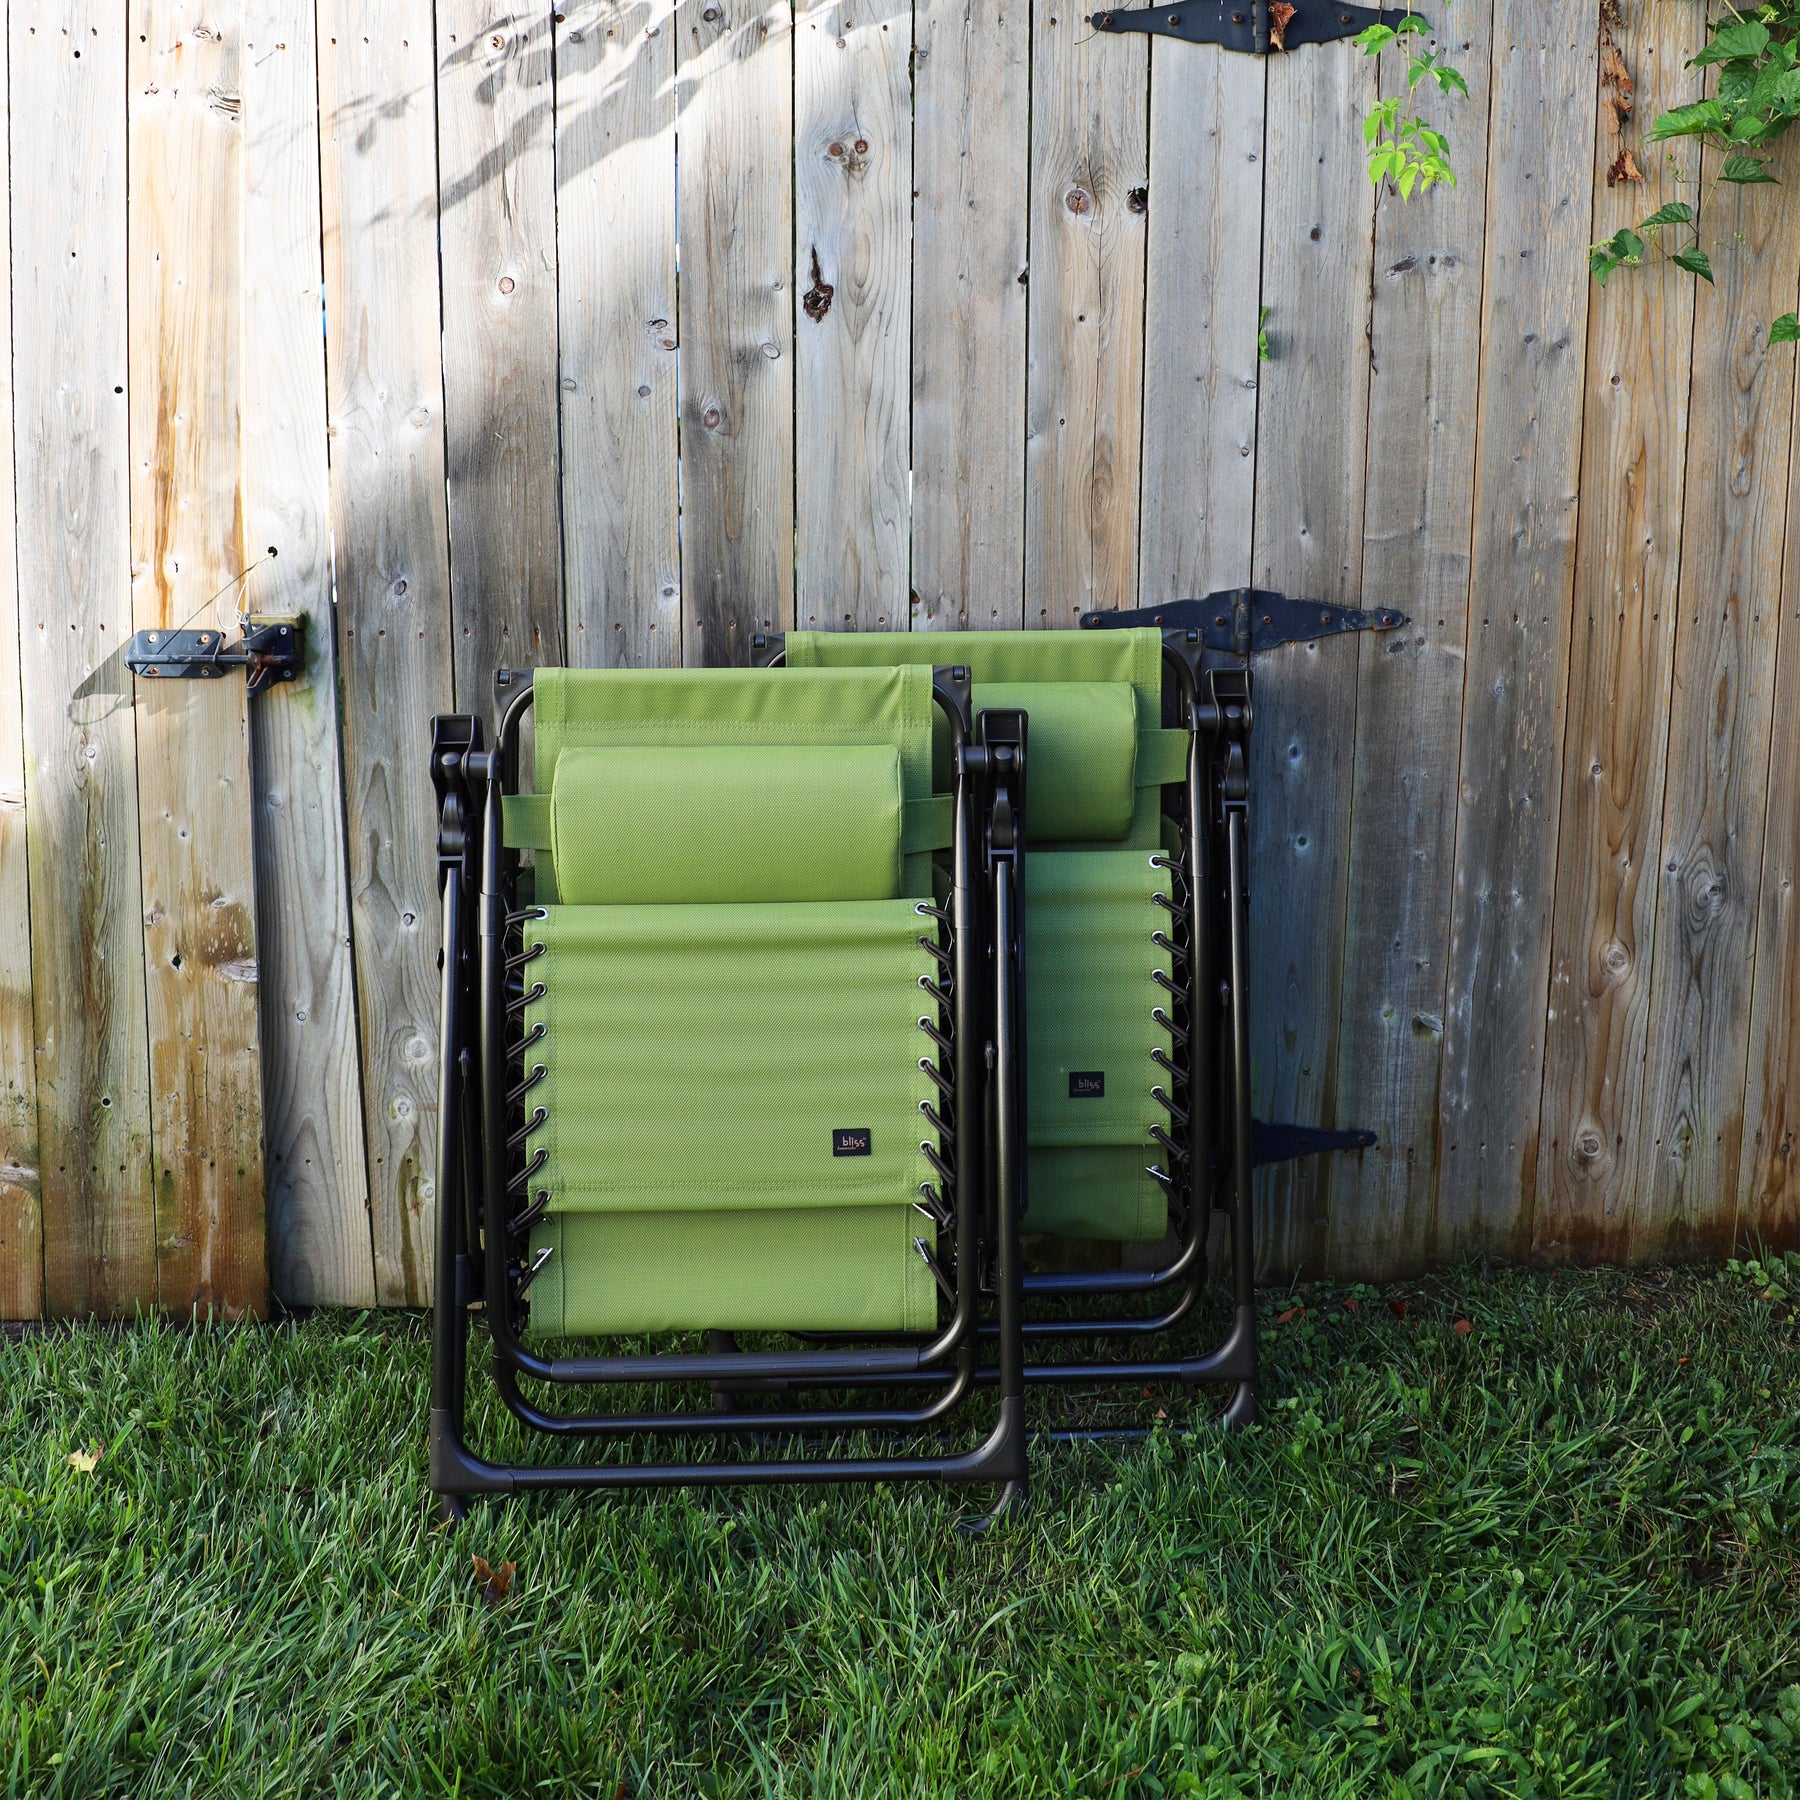 Set of 2 26-inch sage green Zero Gravity Chairs folded and leaning against a fence.